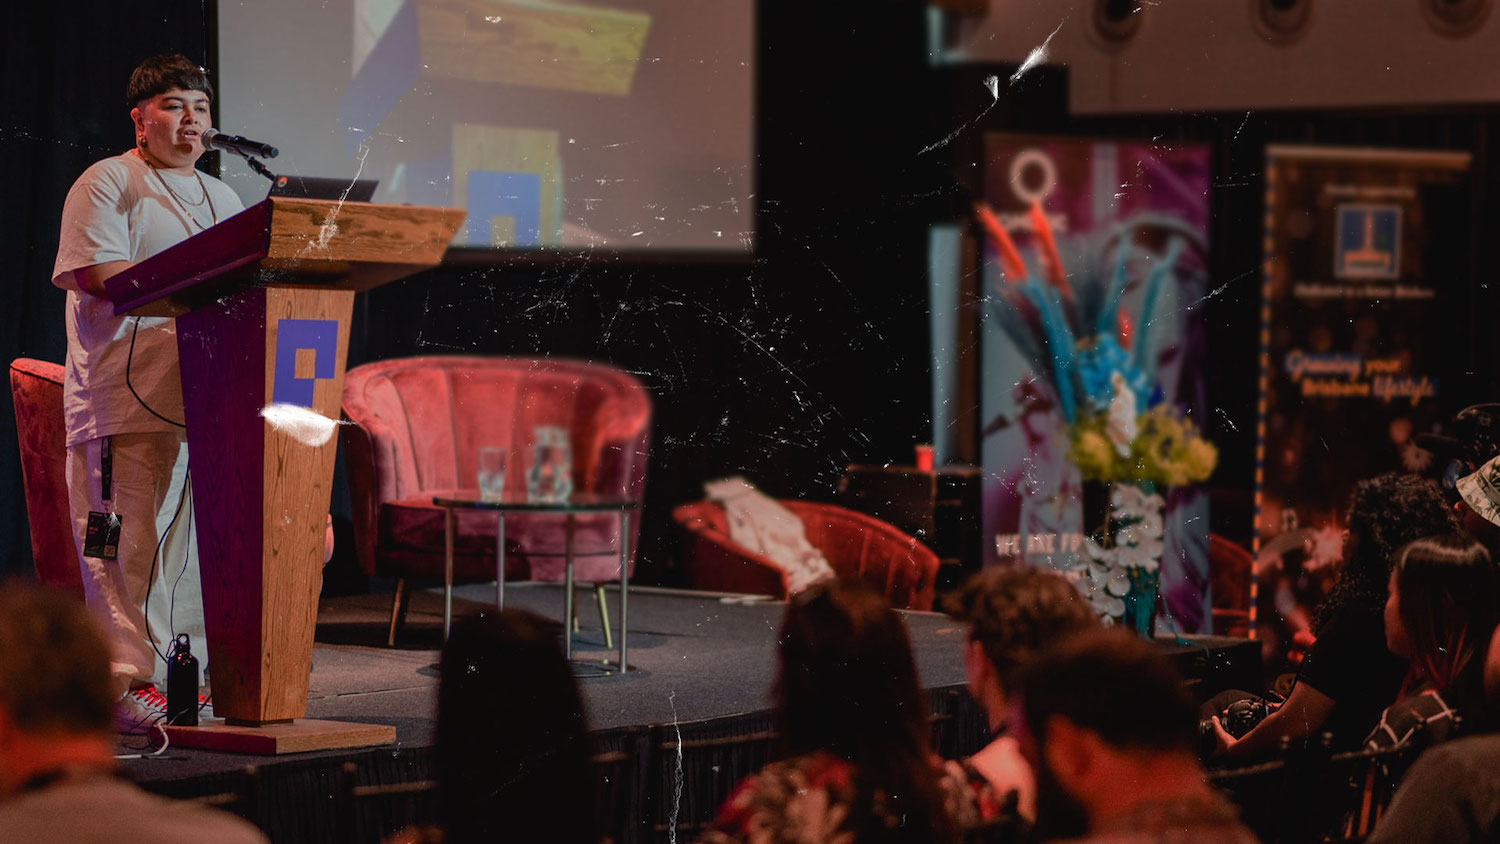 BIGSOUND 2020 goes online amid ongoing COVID-19 restrictions